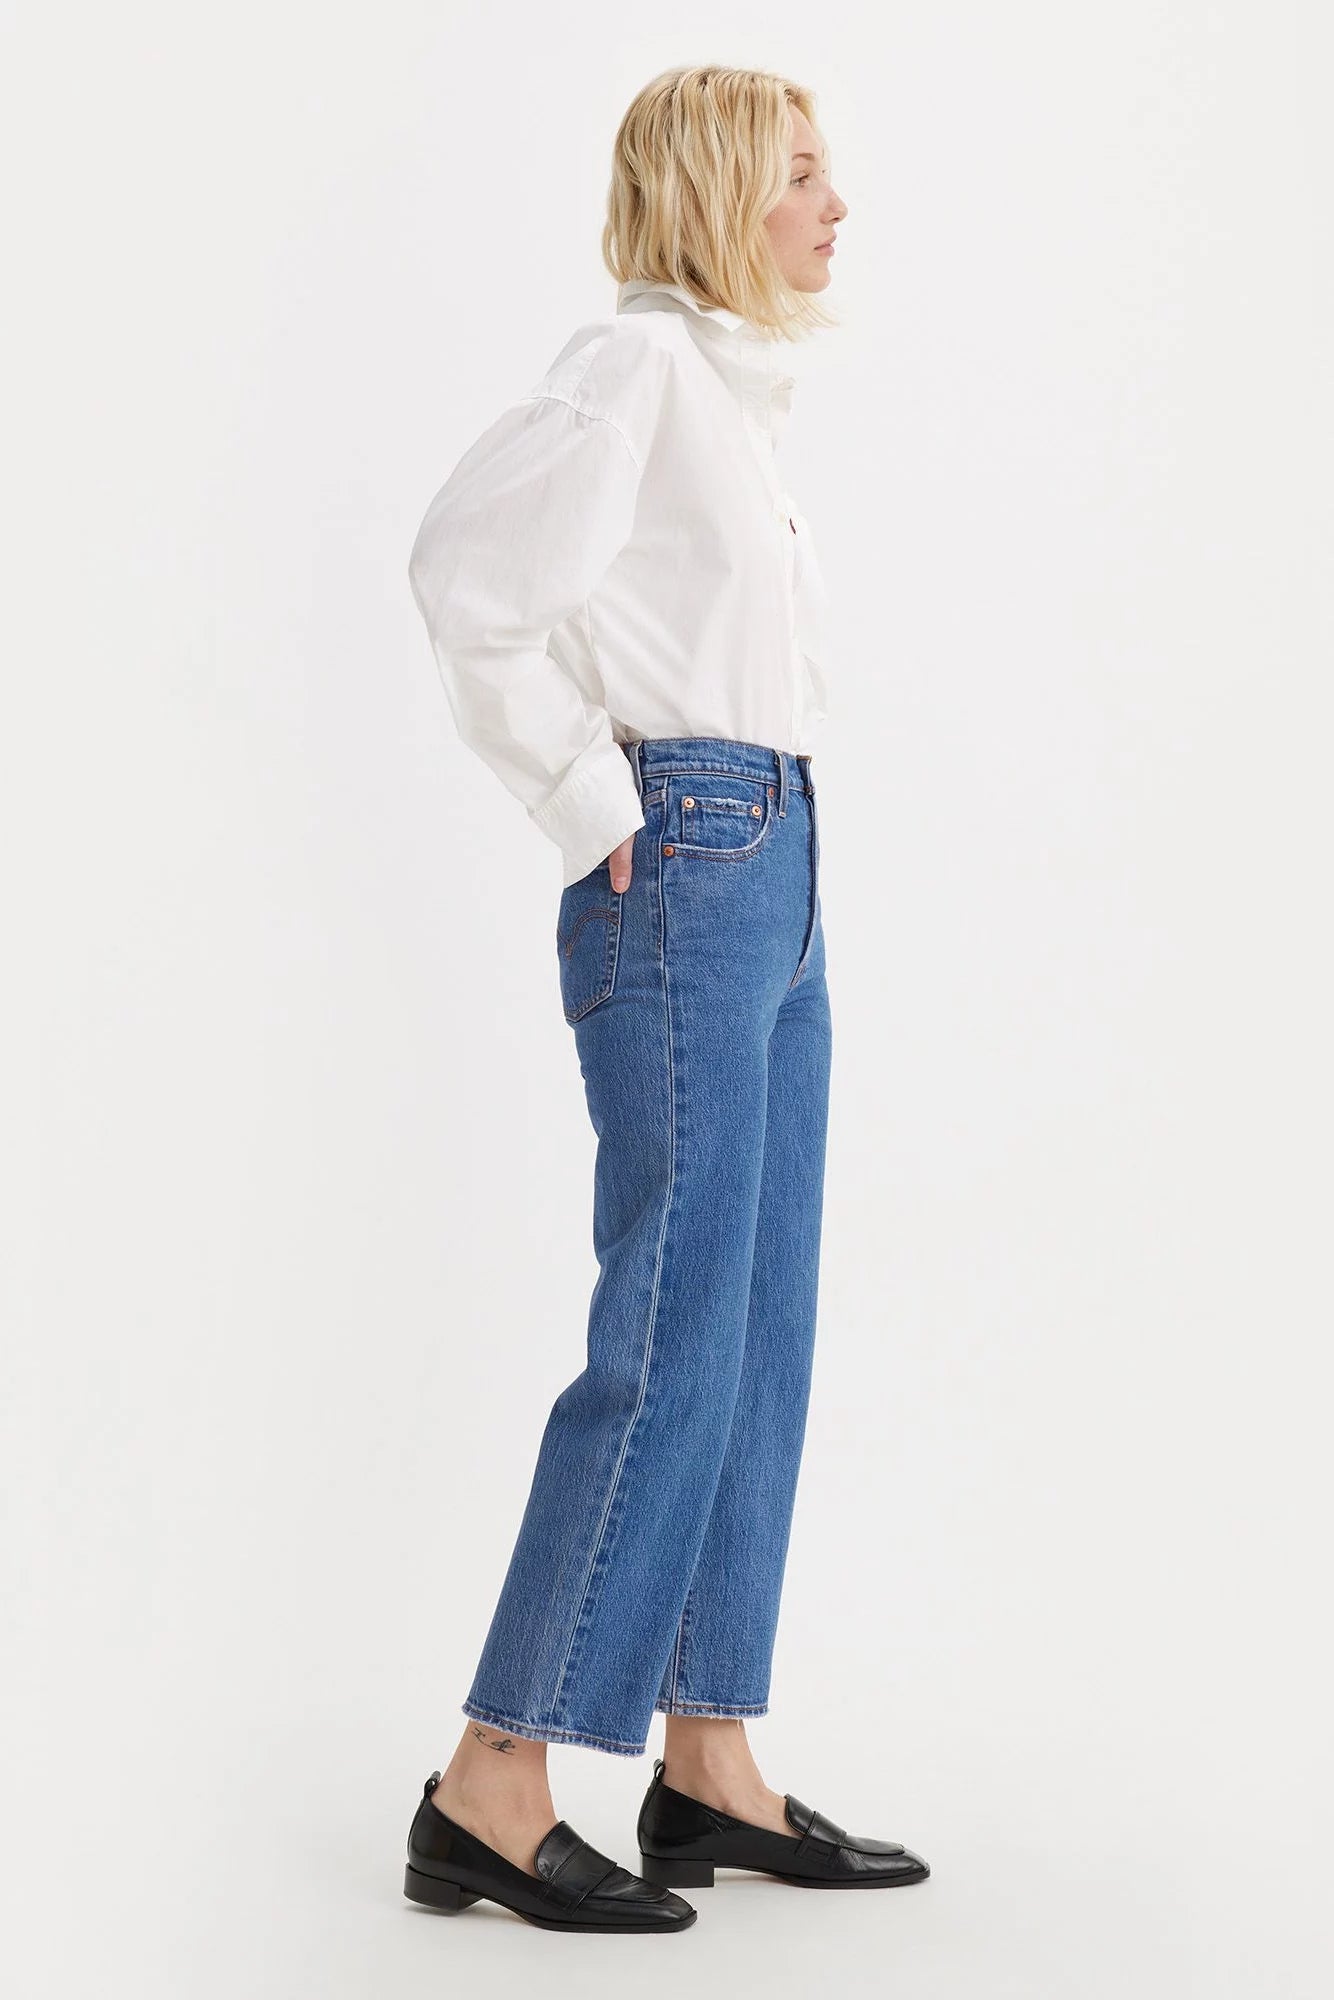 Ribcage Straight Ankle Jeans Pants Levi's   